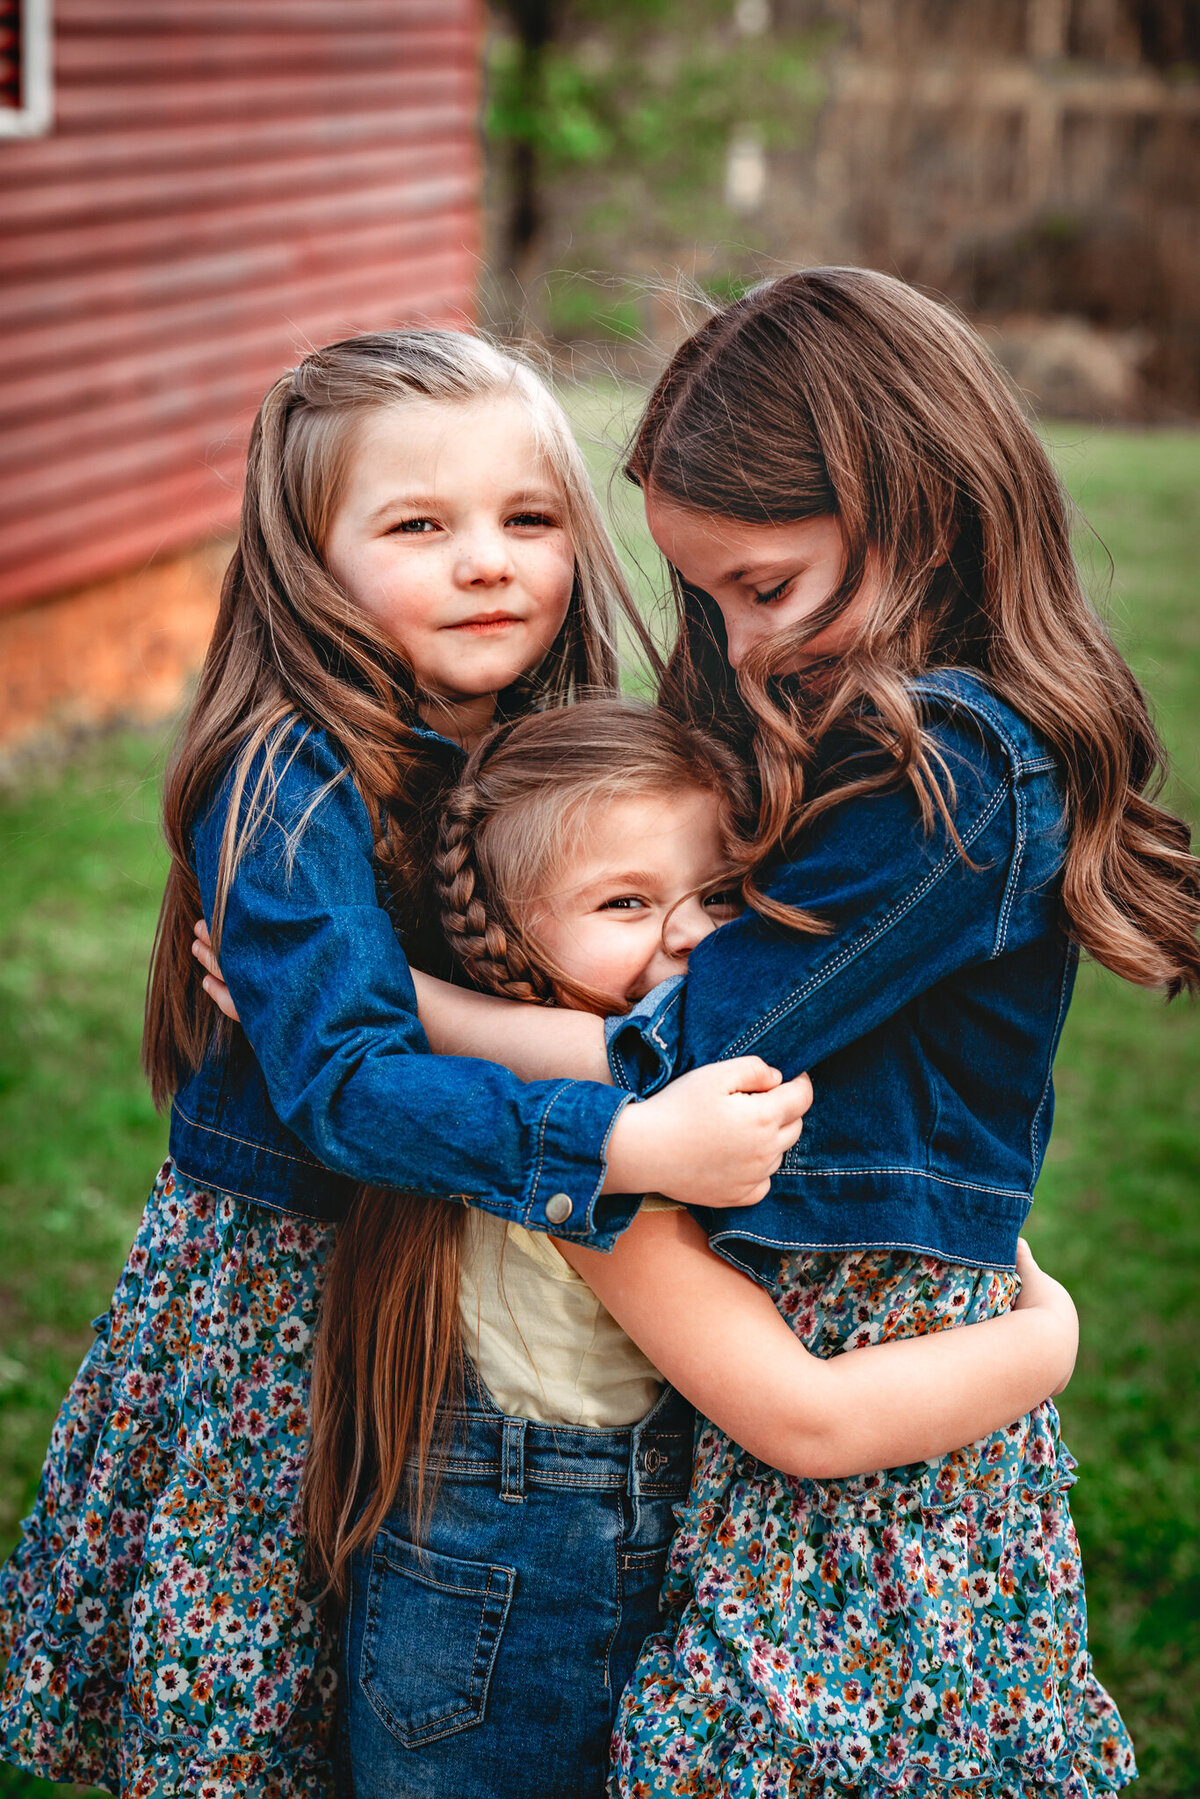 Three young sisters dressed in blue are hugging each other.